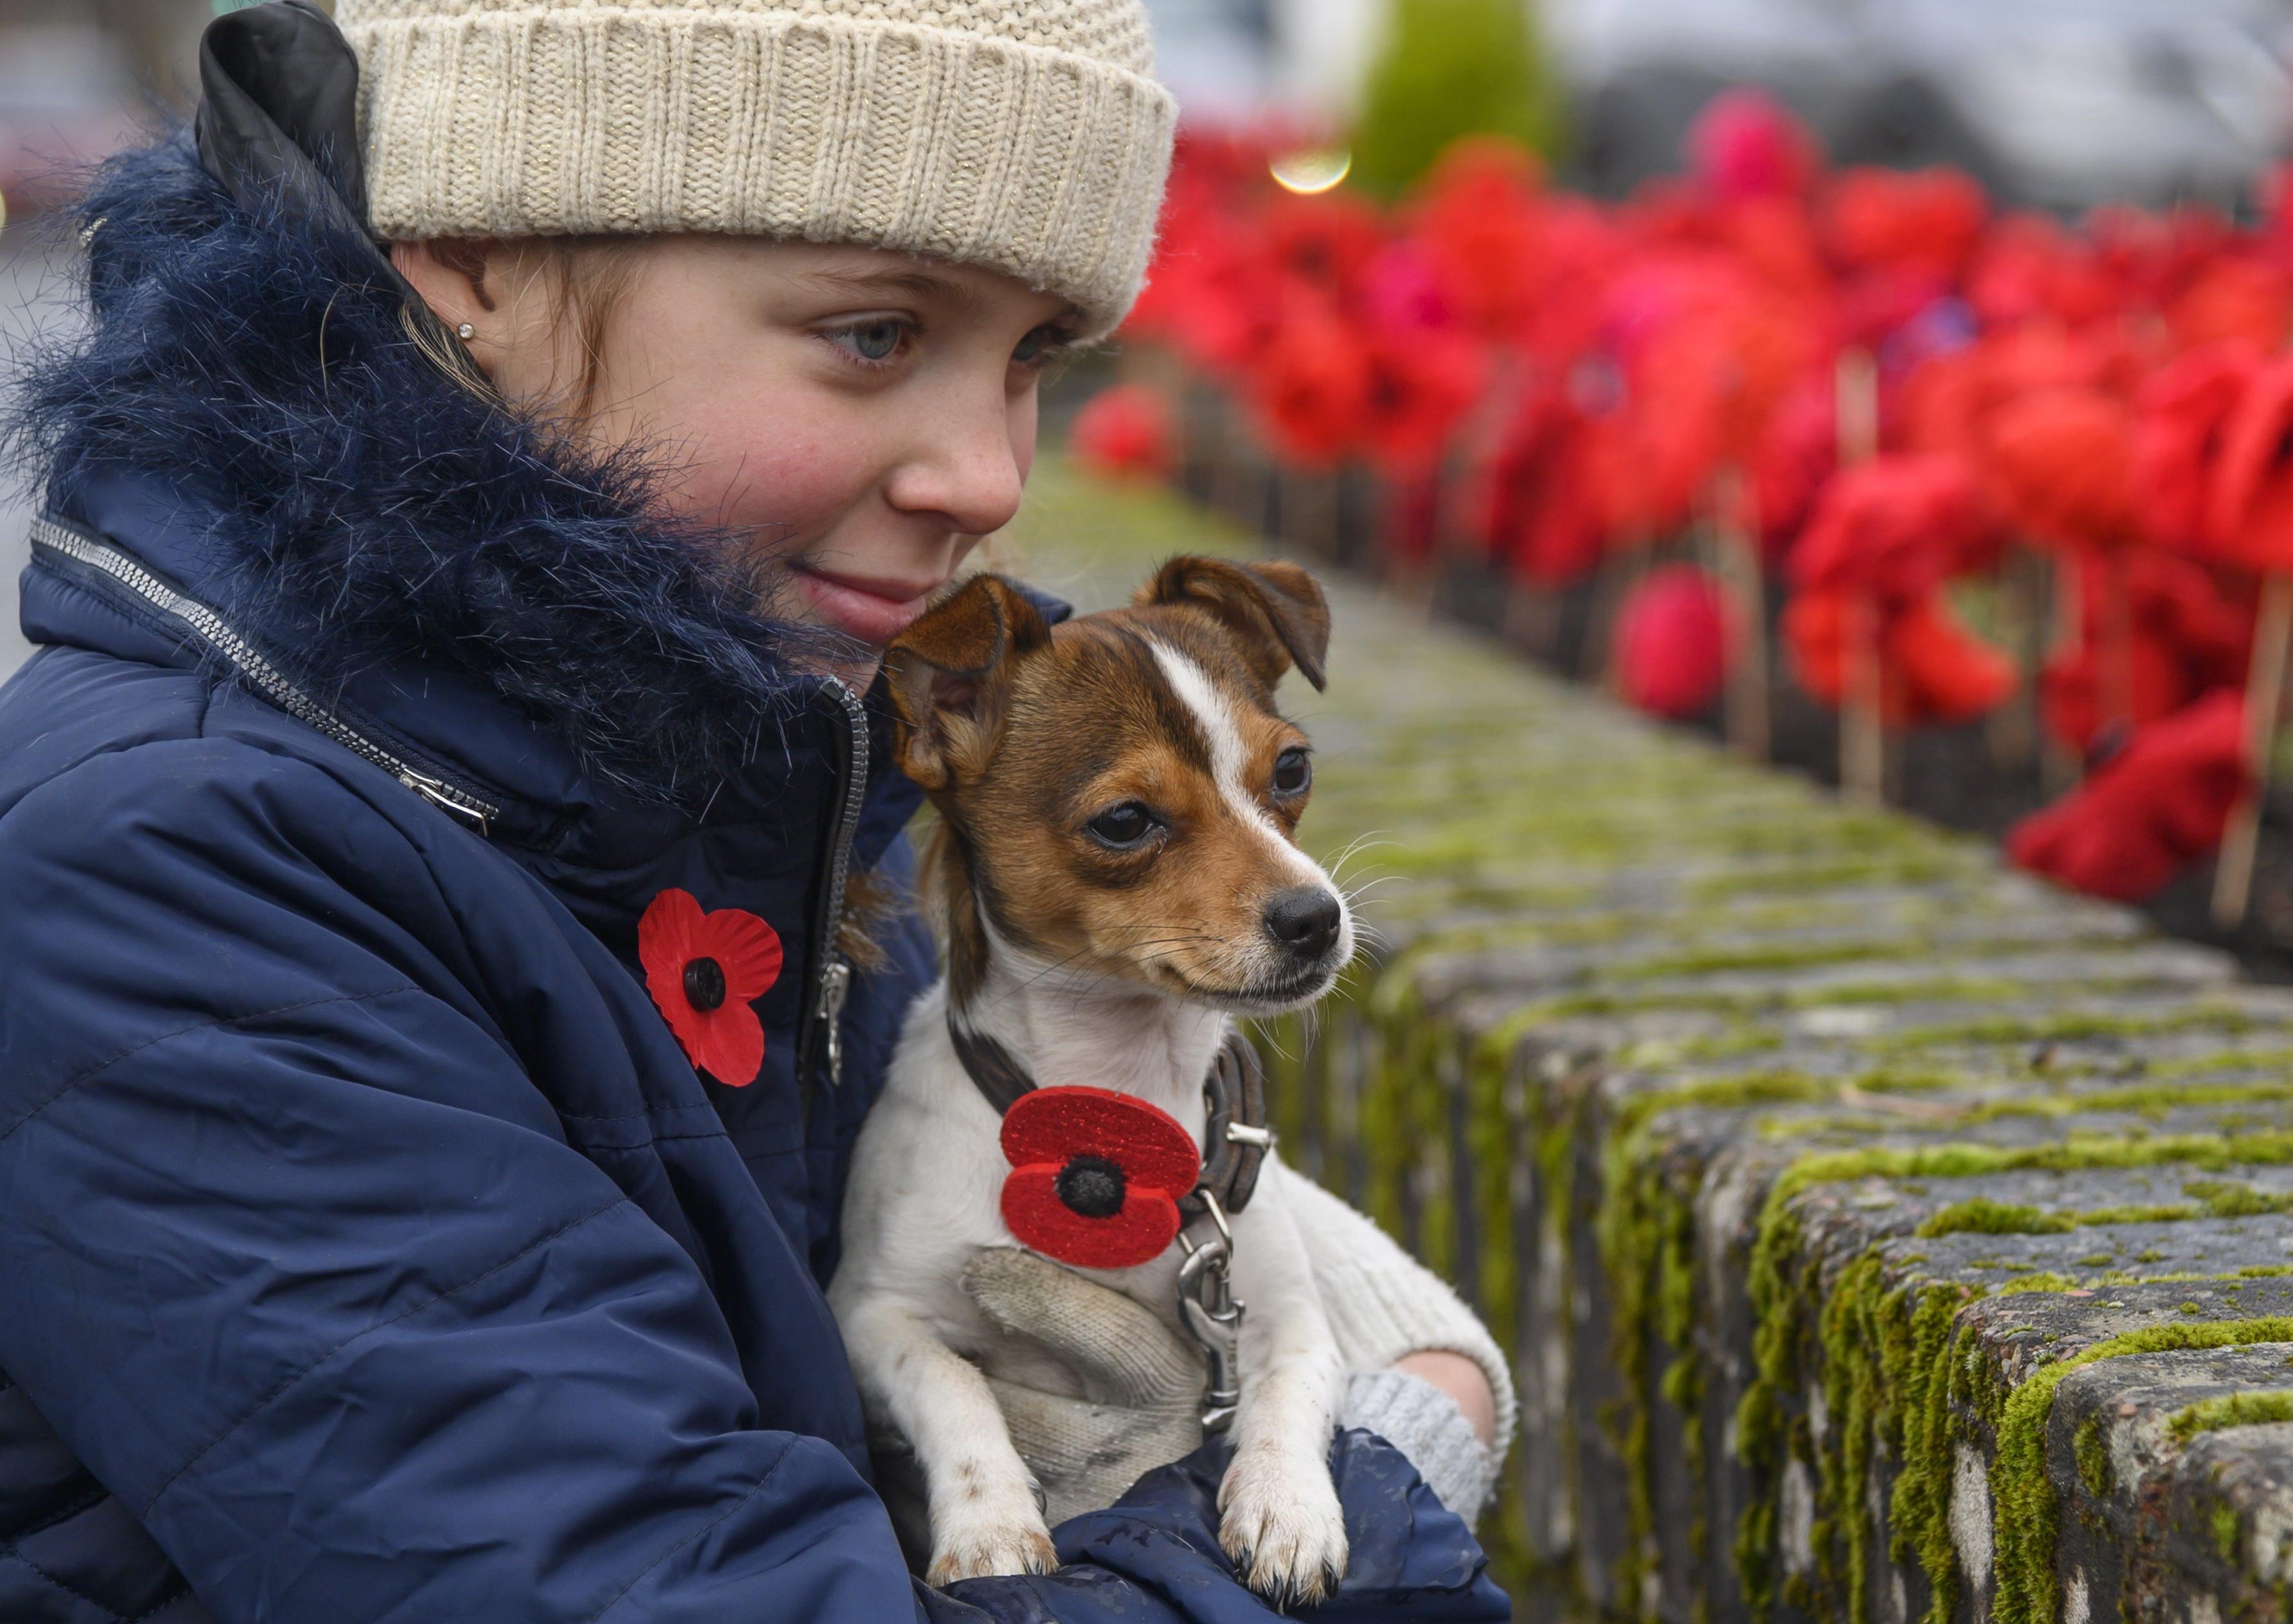 Meghan Hendry and her dog Smudge look at knitted poppies in Lauder
.